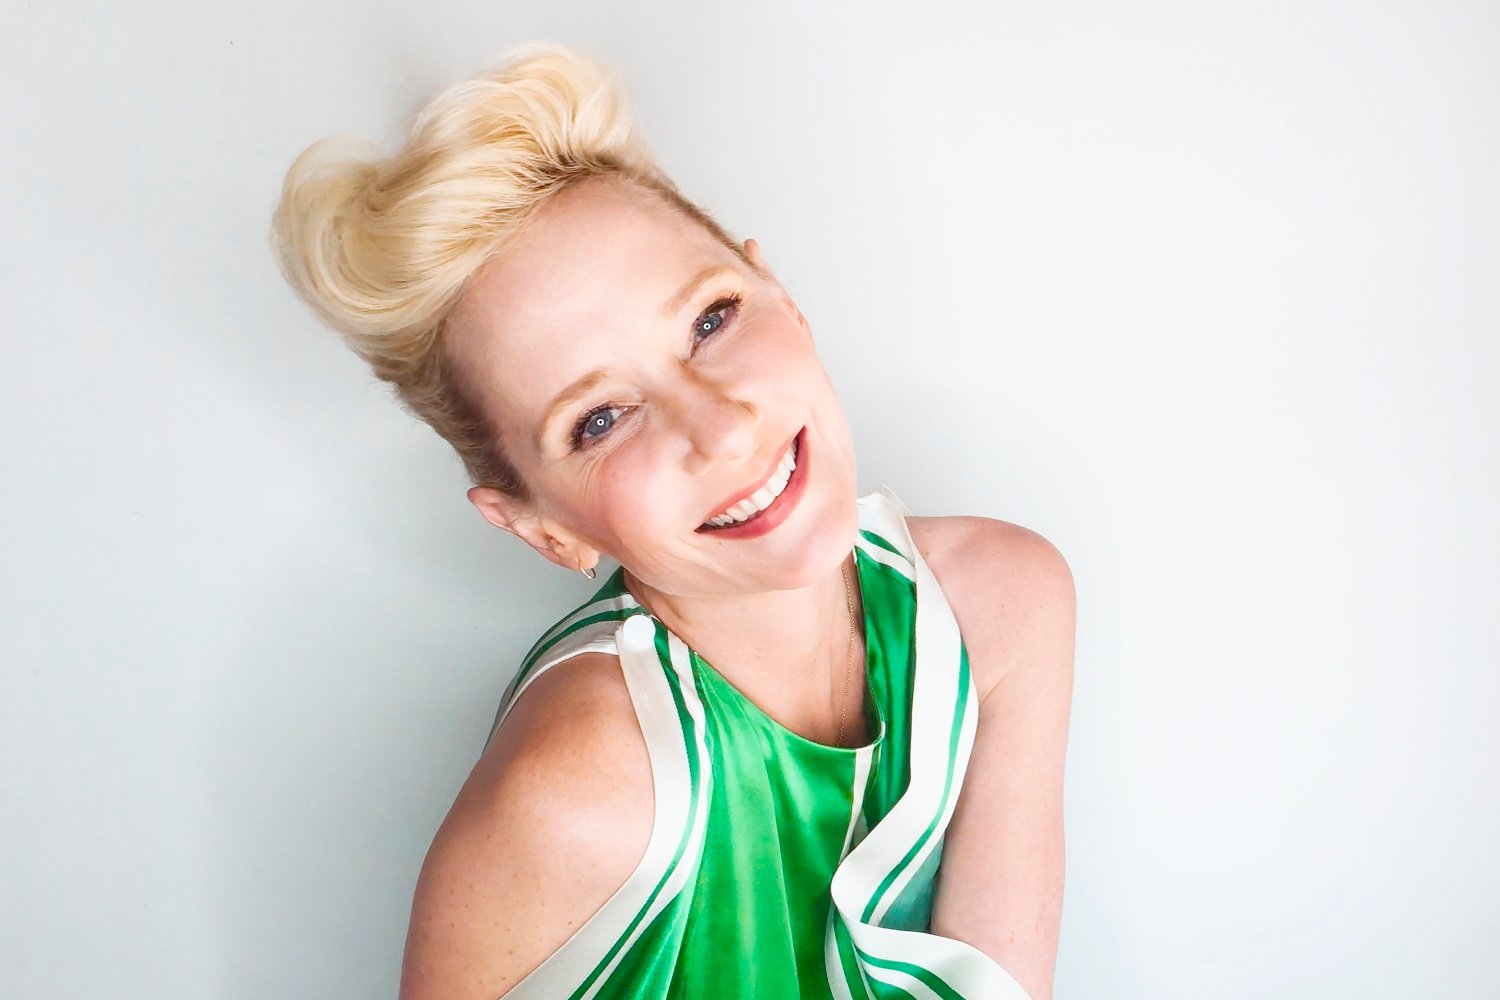 ABC's "Dancing With The Stars" stars Anne Heche.